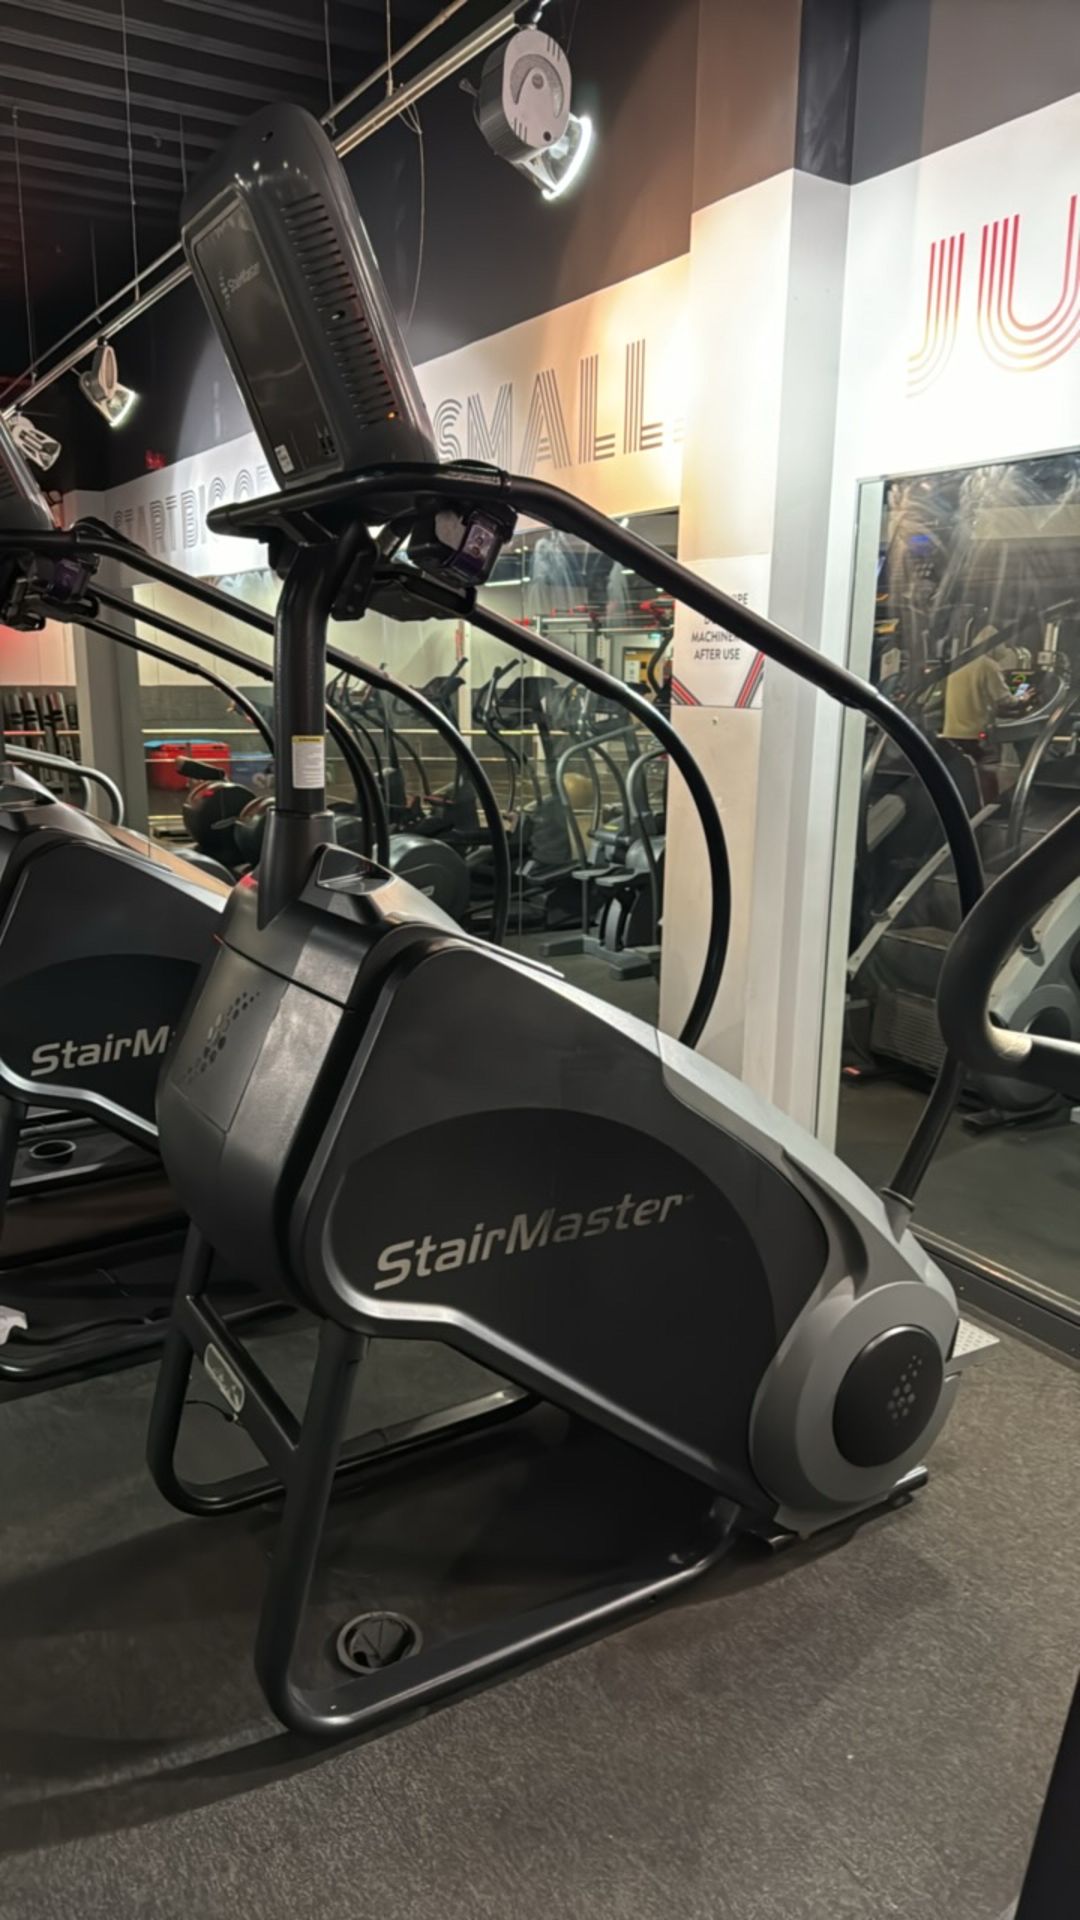 Stairmaster - Image 2 of 6